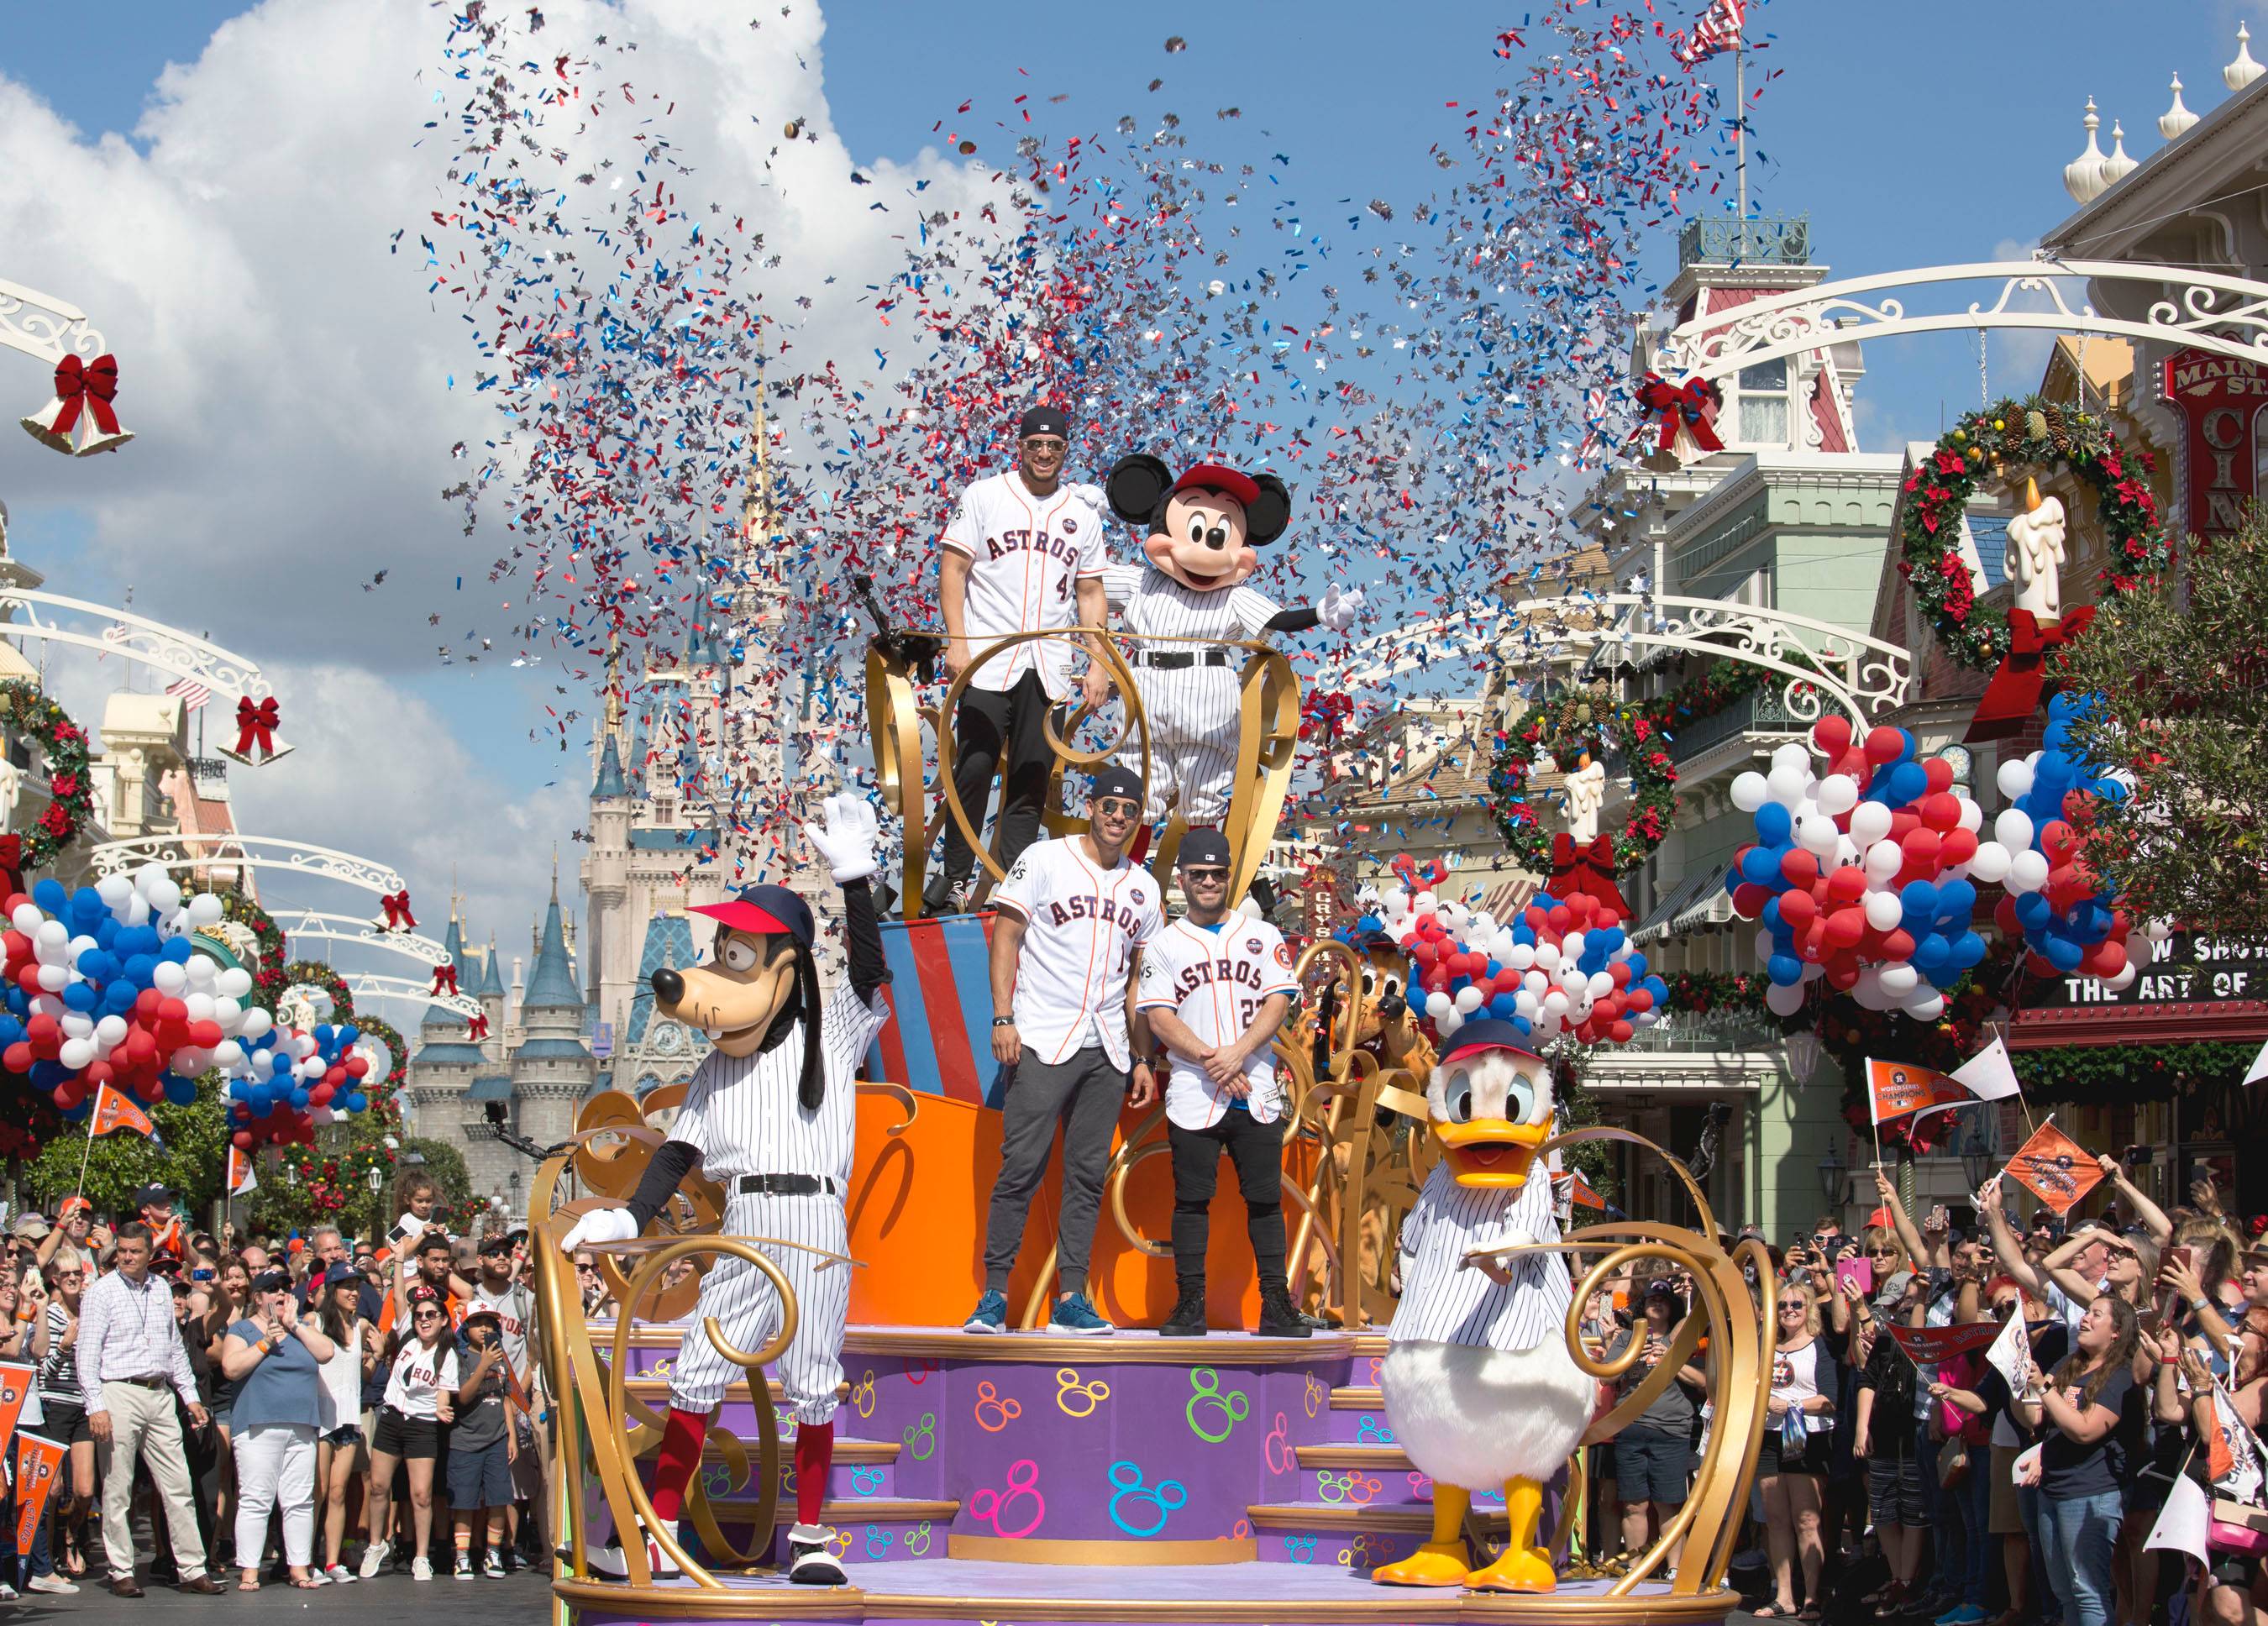 VIDEO - Houston Astros players celebrate team's First-Ever World Series title with victory parade at Walt Disney World Resort